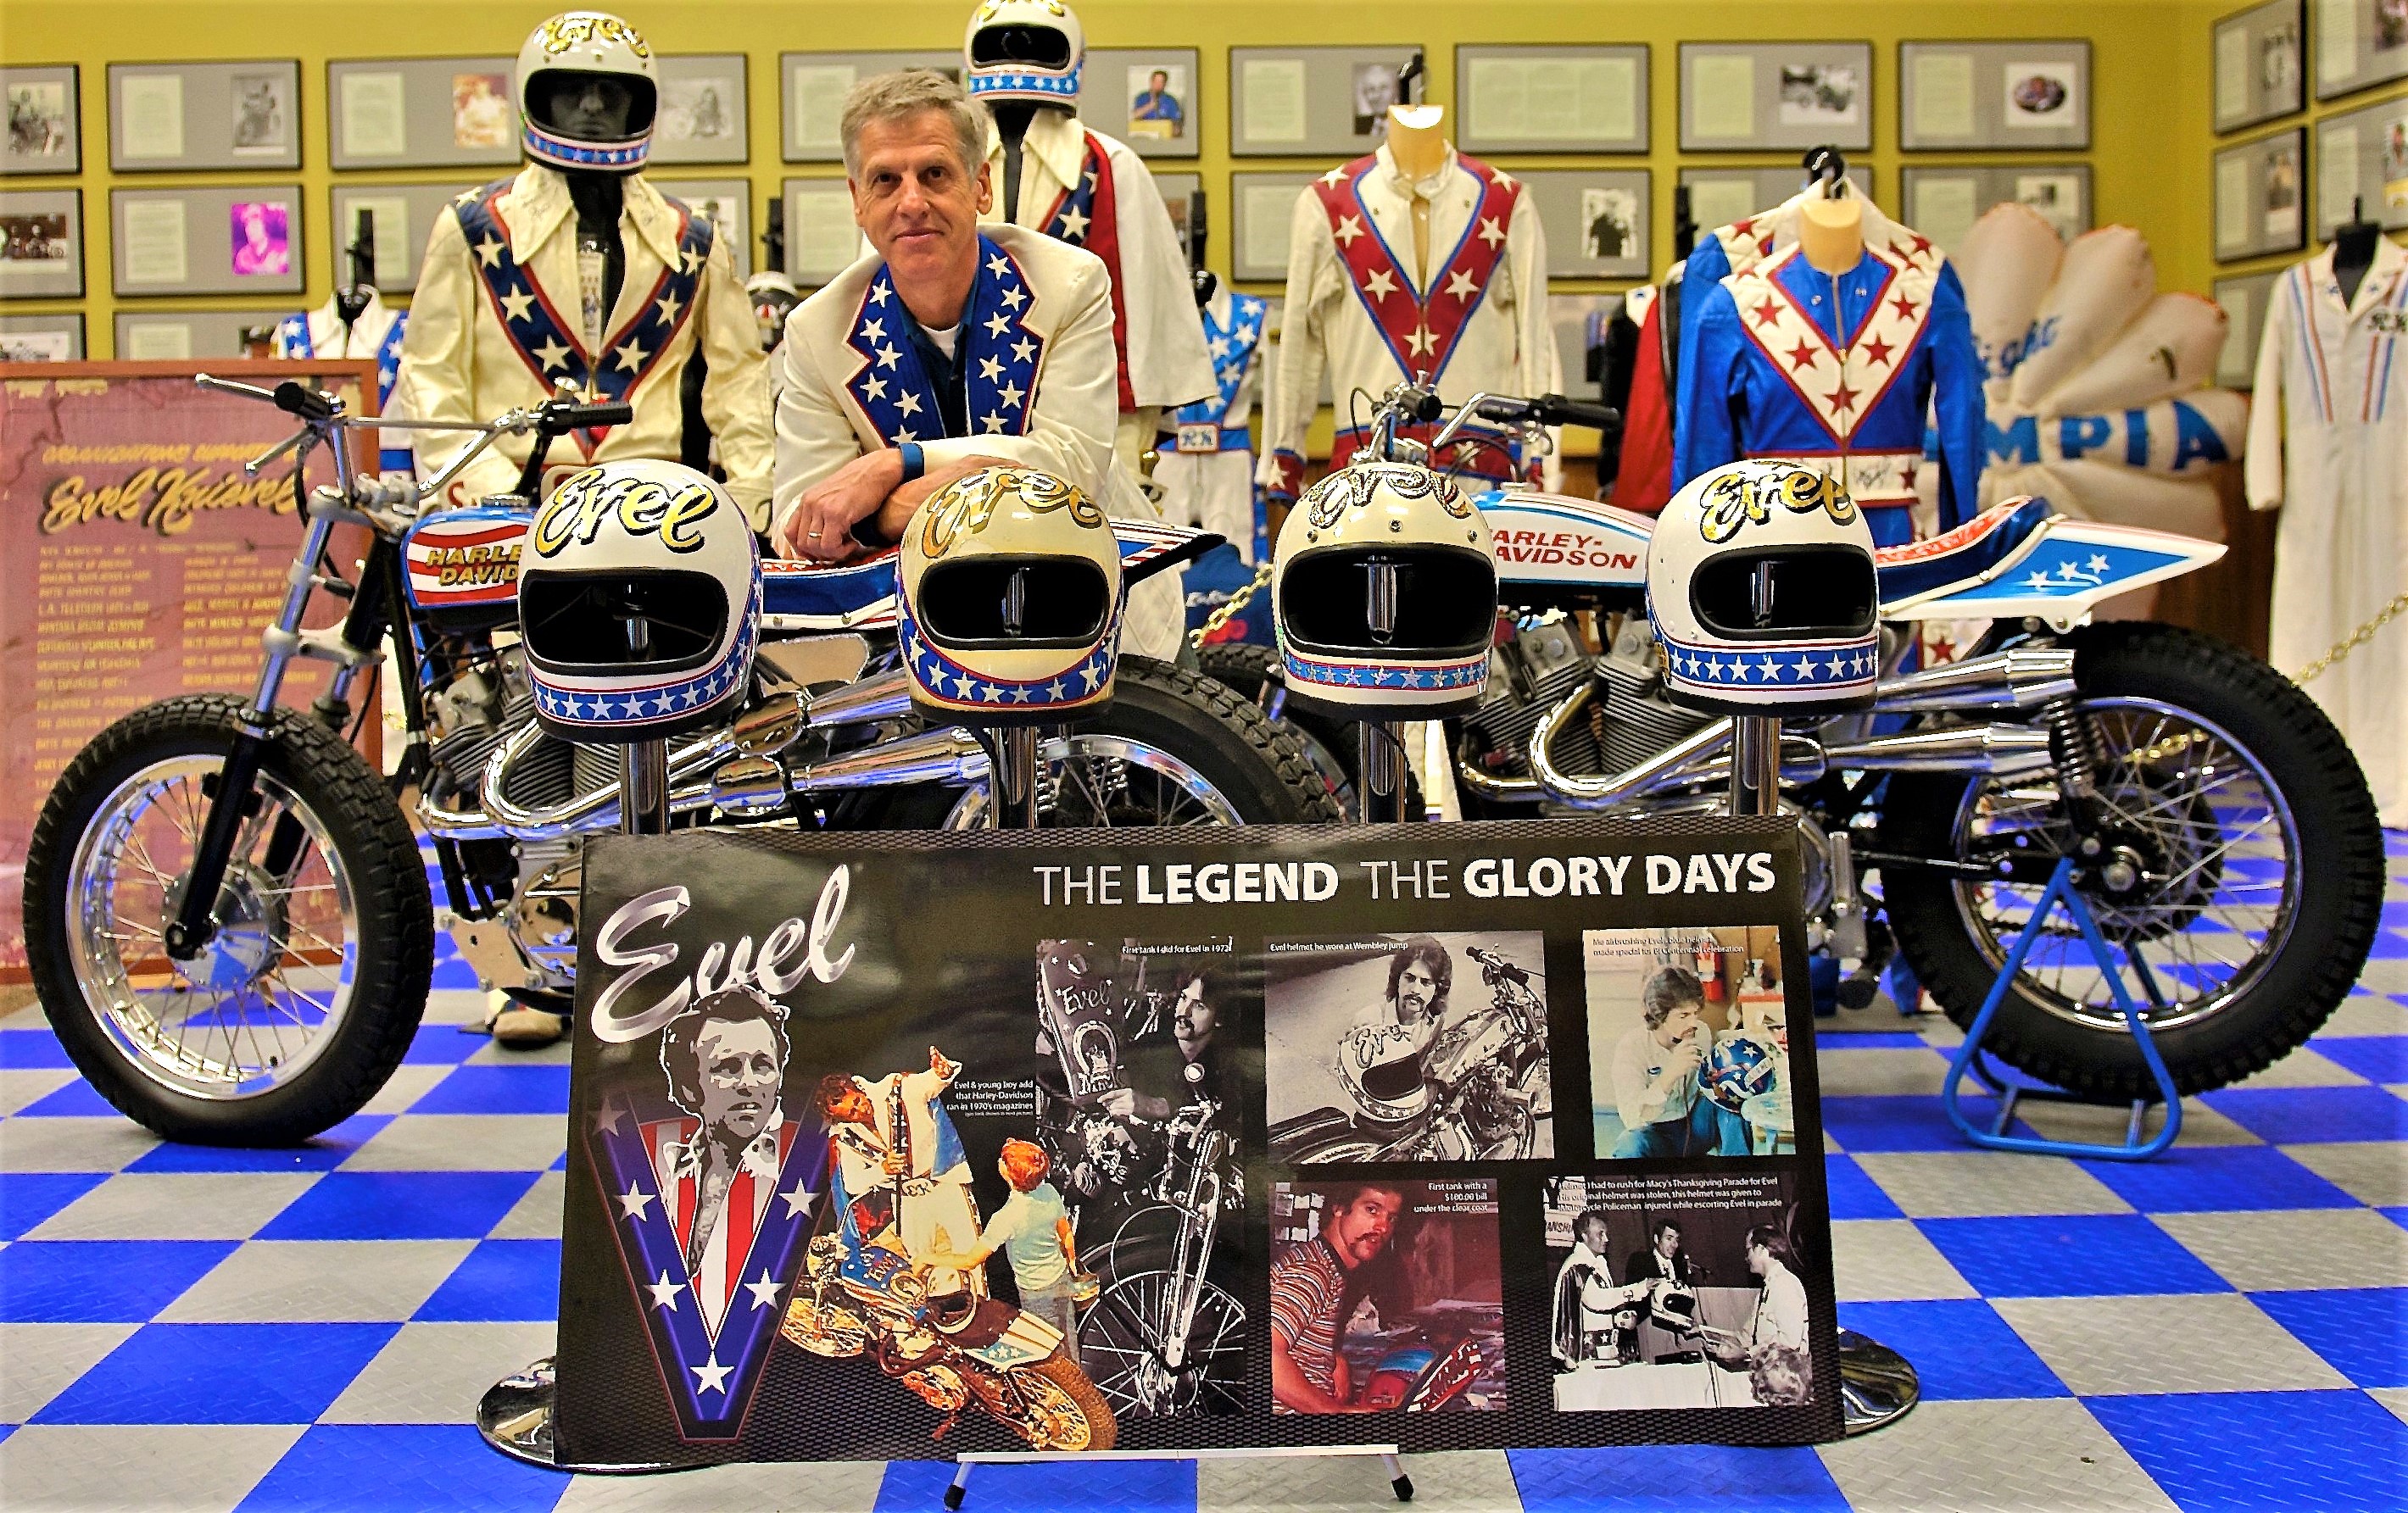 George Sedlak, Color Me Lucky: George Sedlak on becoming Evel Knievel’s painter, ClassicCars.com Journal